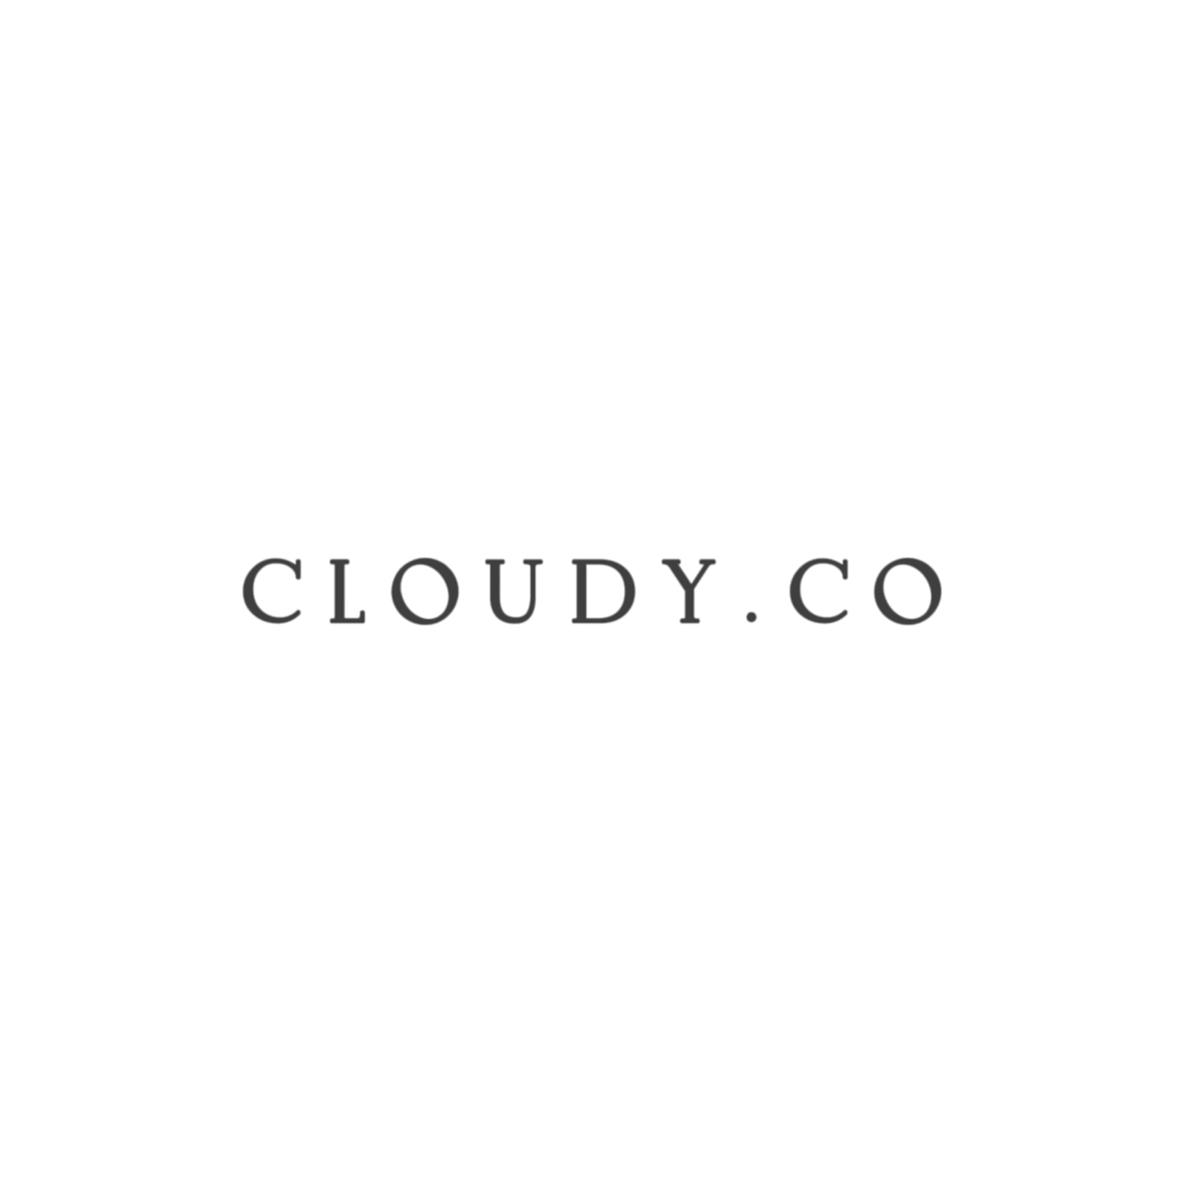 cloudy.co